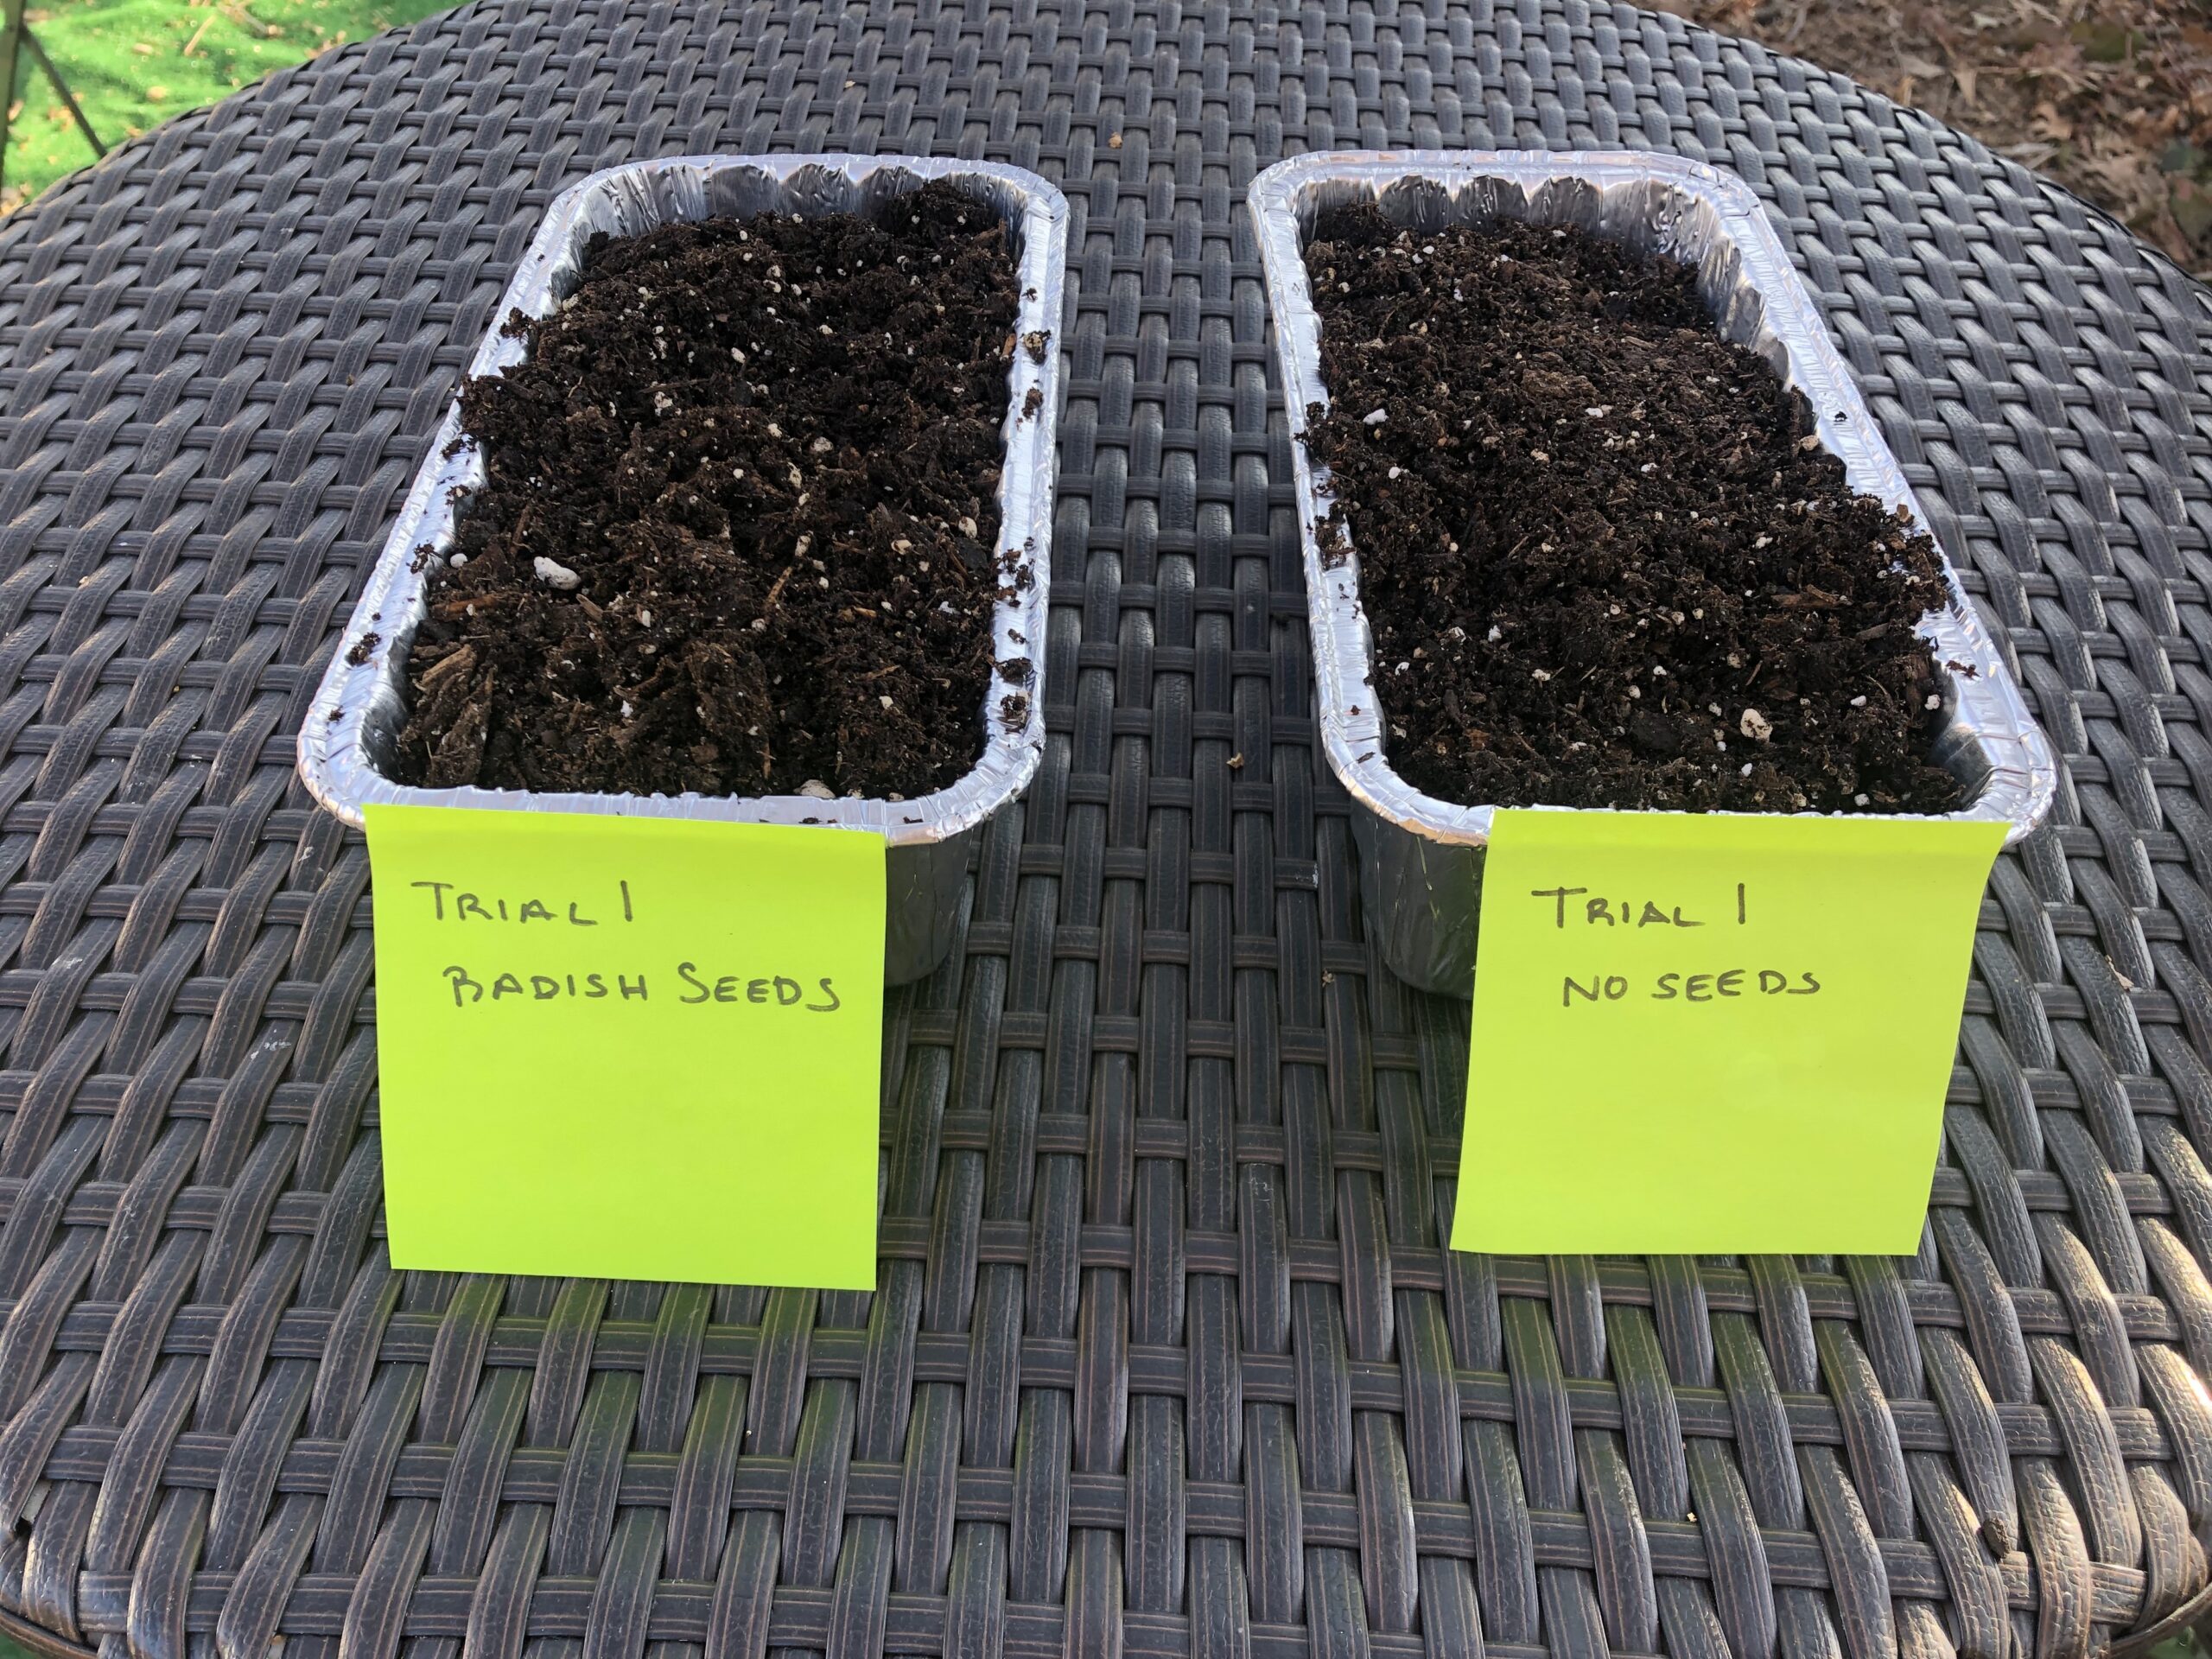 two bread pans filled with soil; one labeled "trial 1: radish seeds" and the other labeled "trial 1: no seeds"